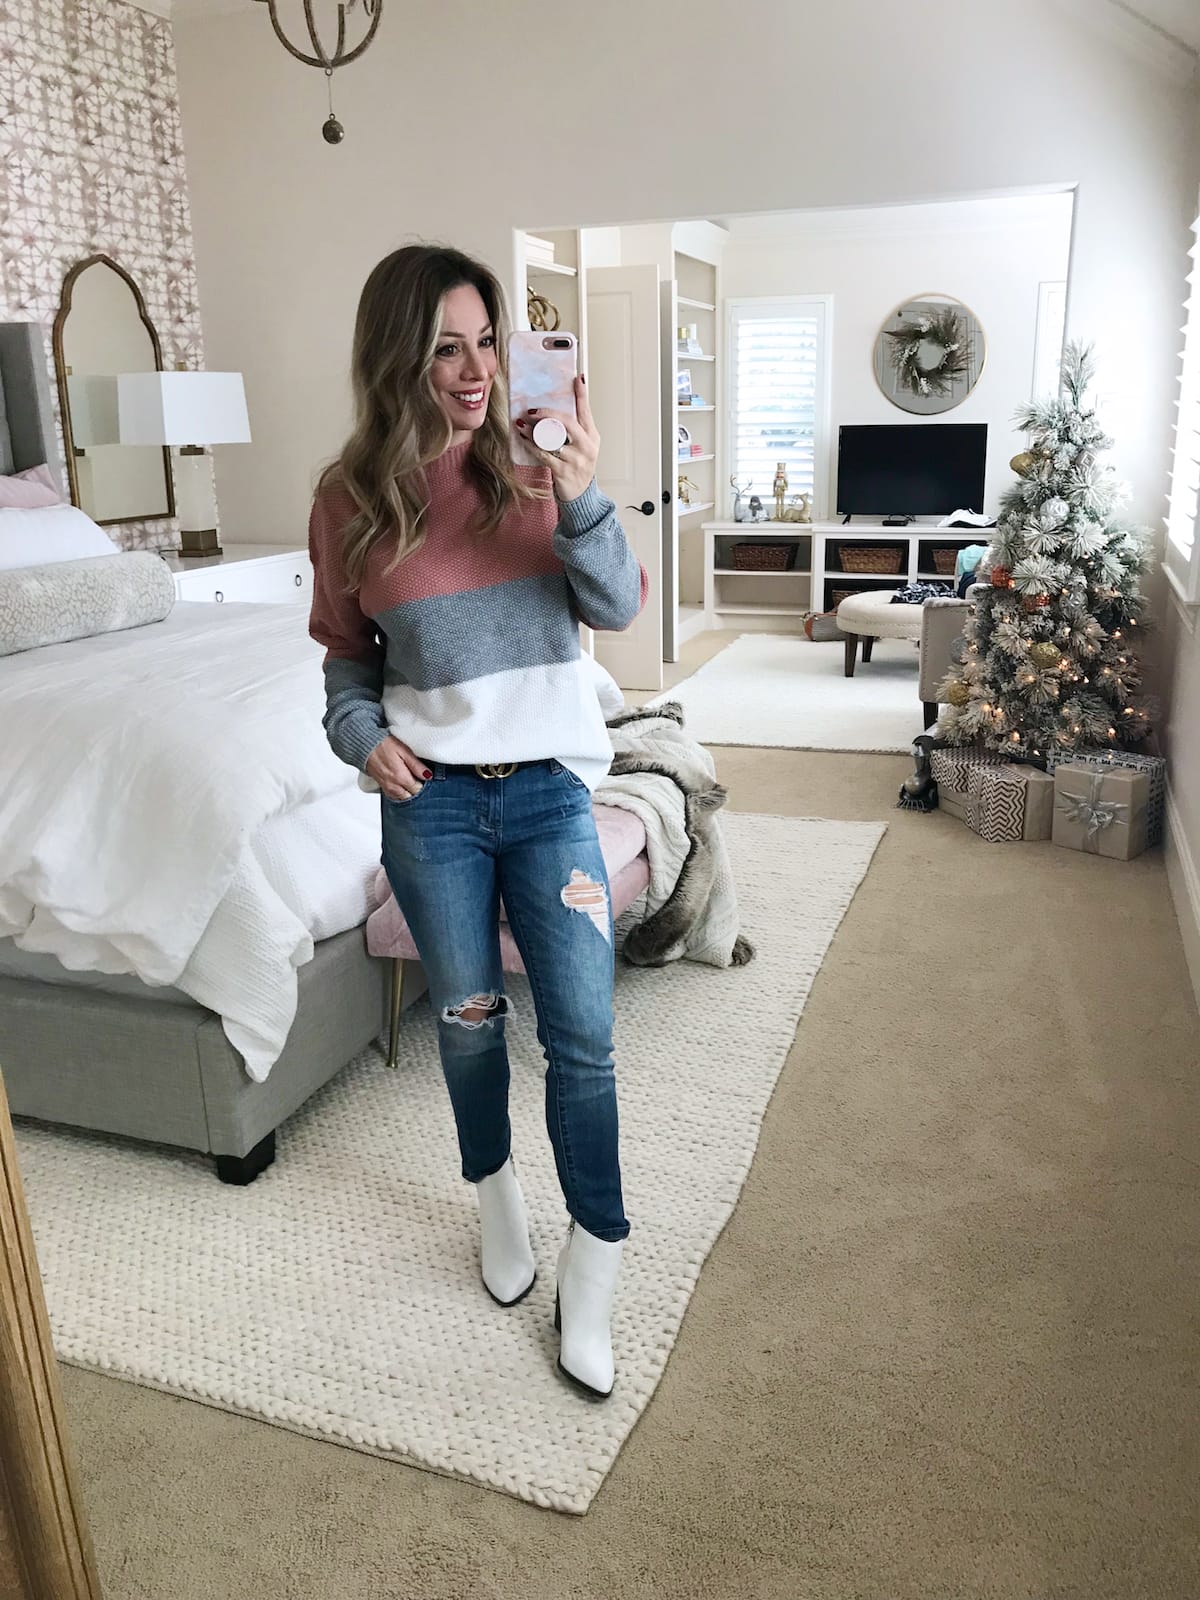 Amazon Fashion Haul - jeans and striped sweater